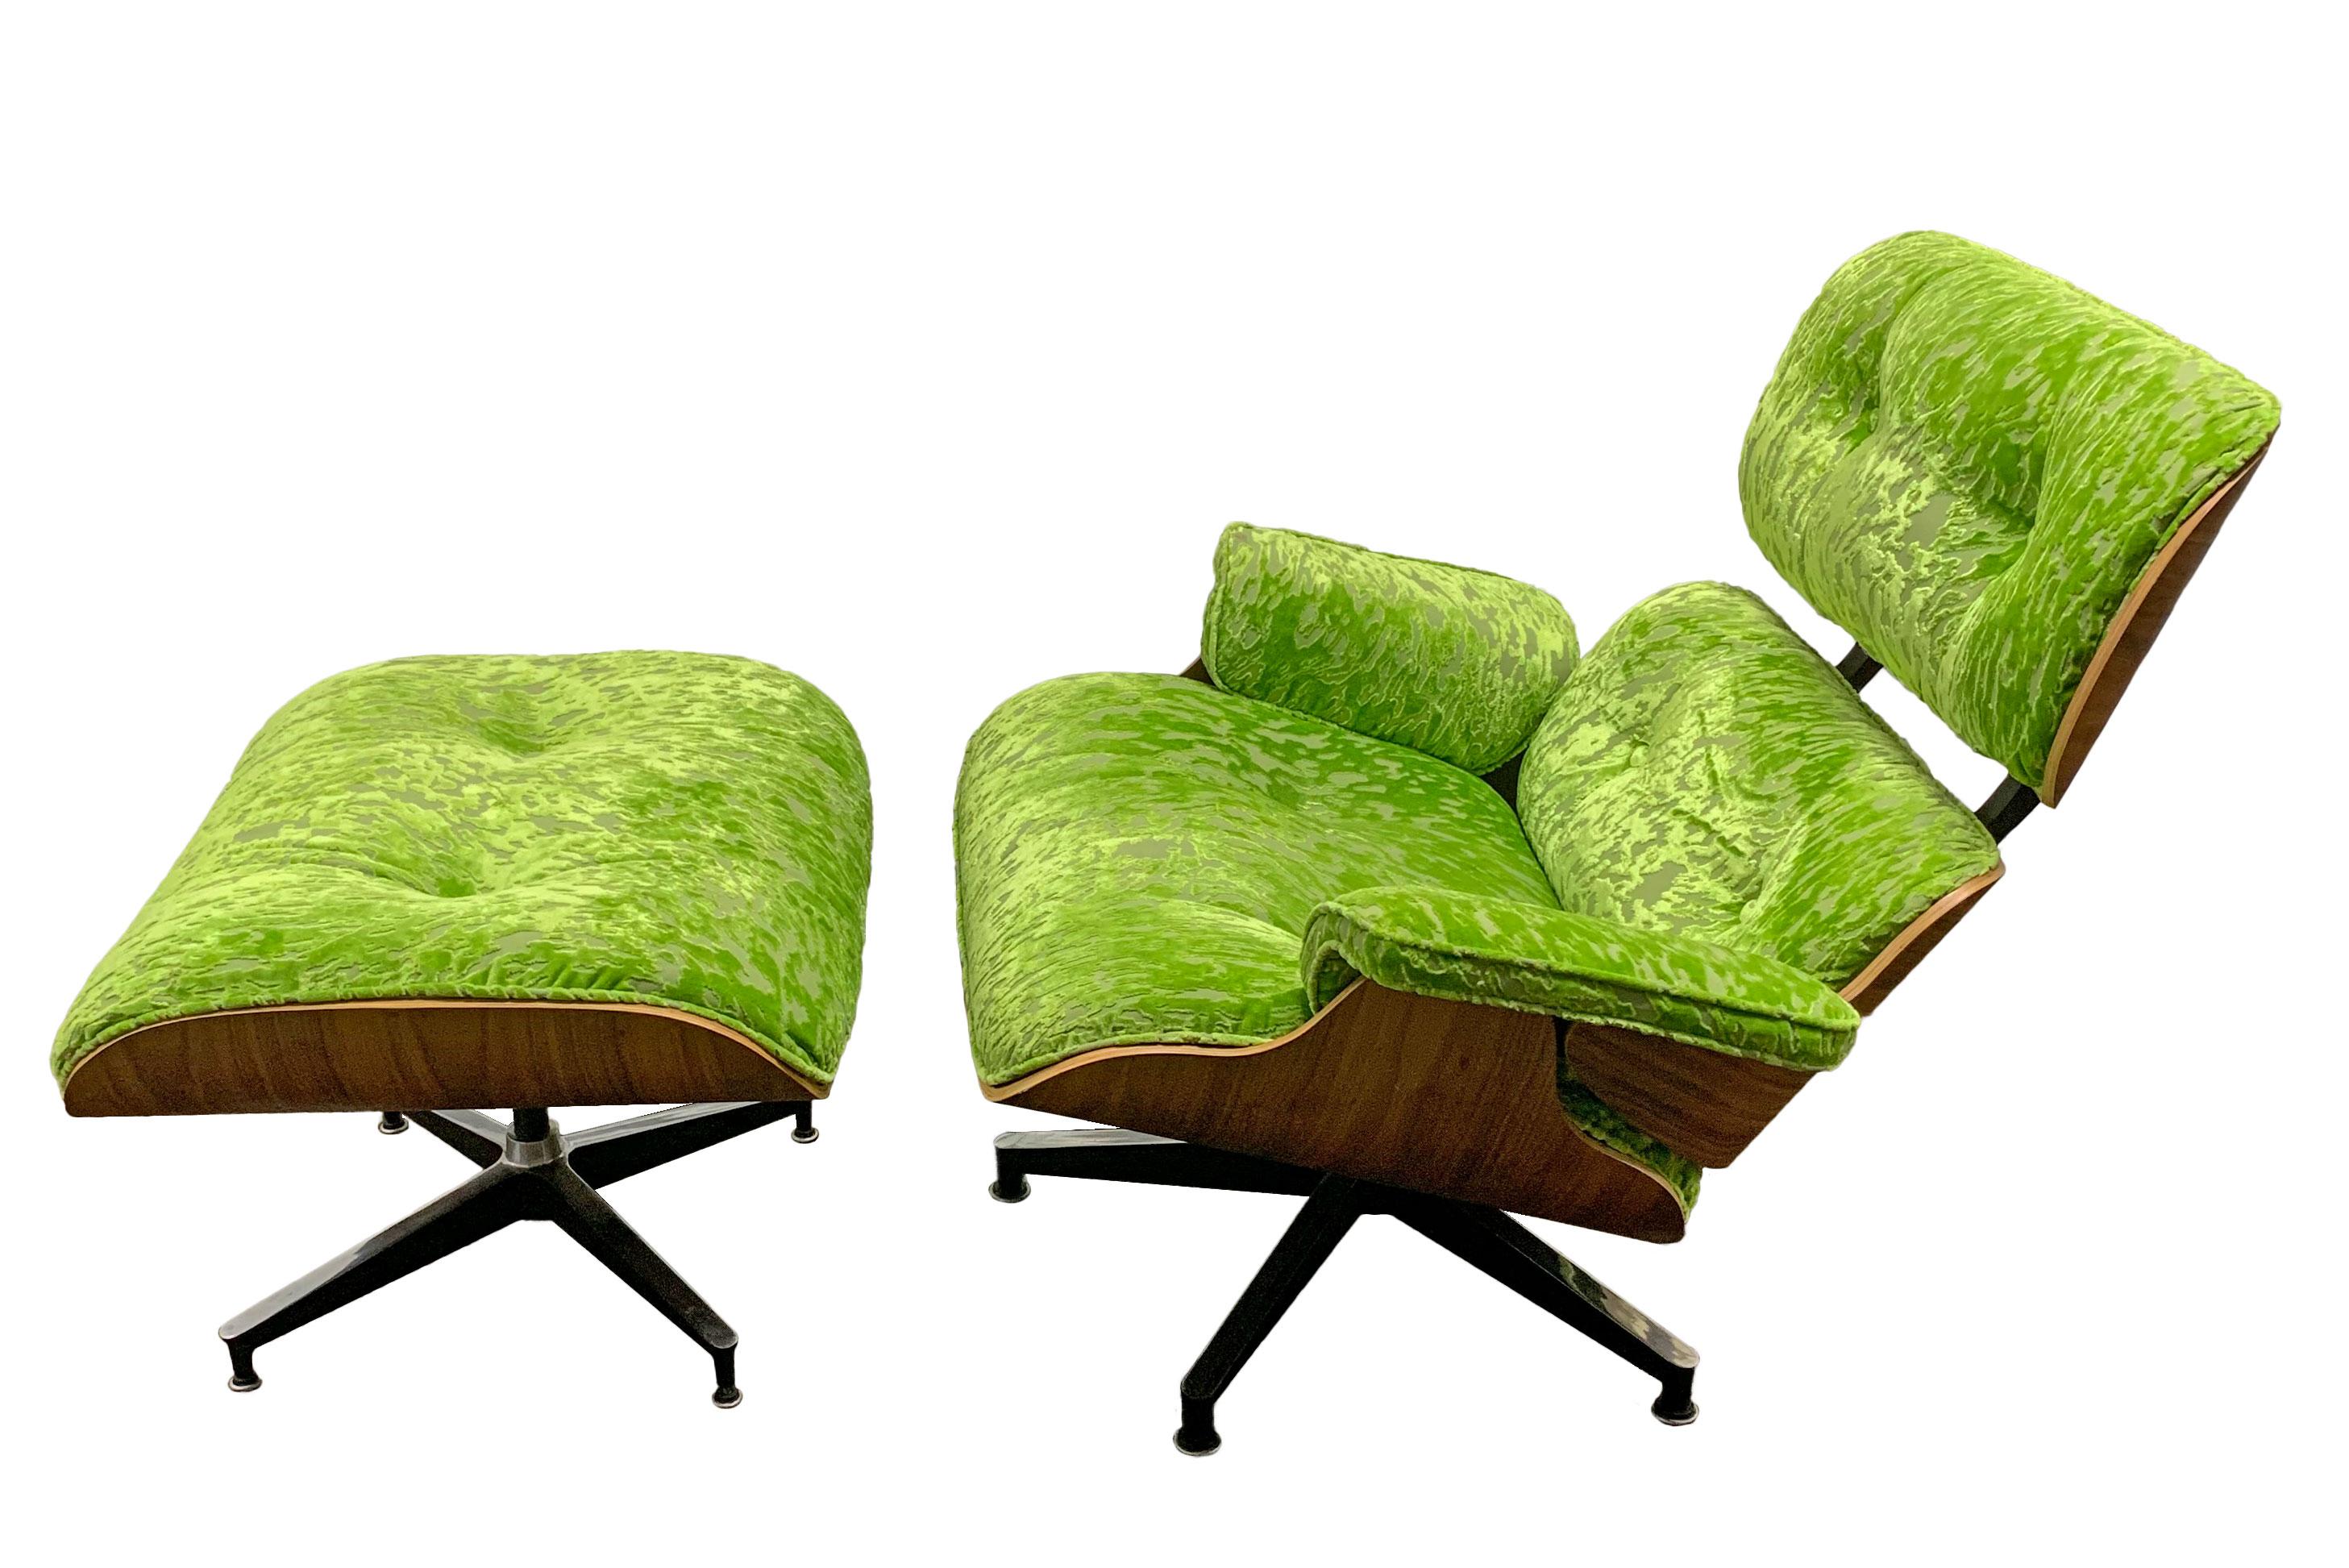 Mid-Century Modern lounge chair and ottoman in style of Charles and Ray Eames.
Recently refurbished and reupholstered in Designers Guild-UK fabric.